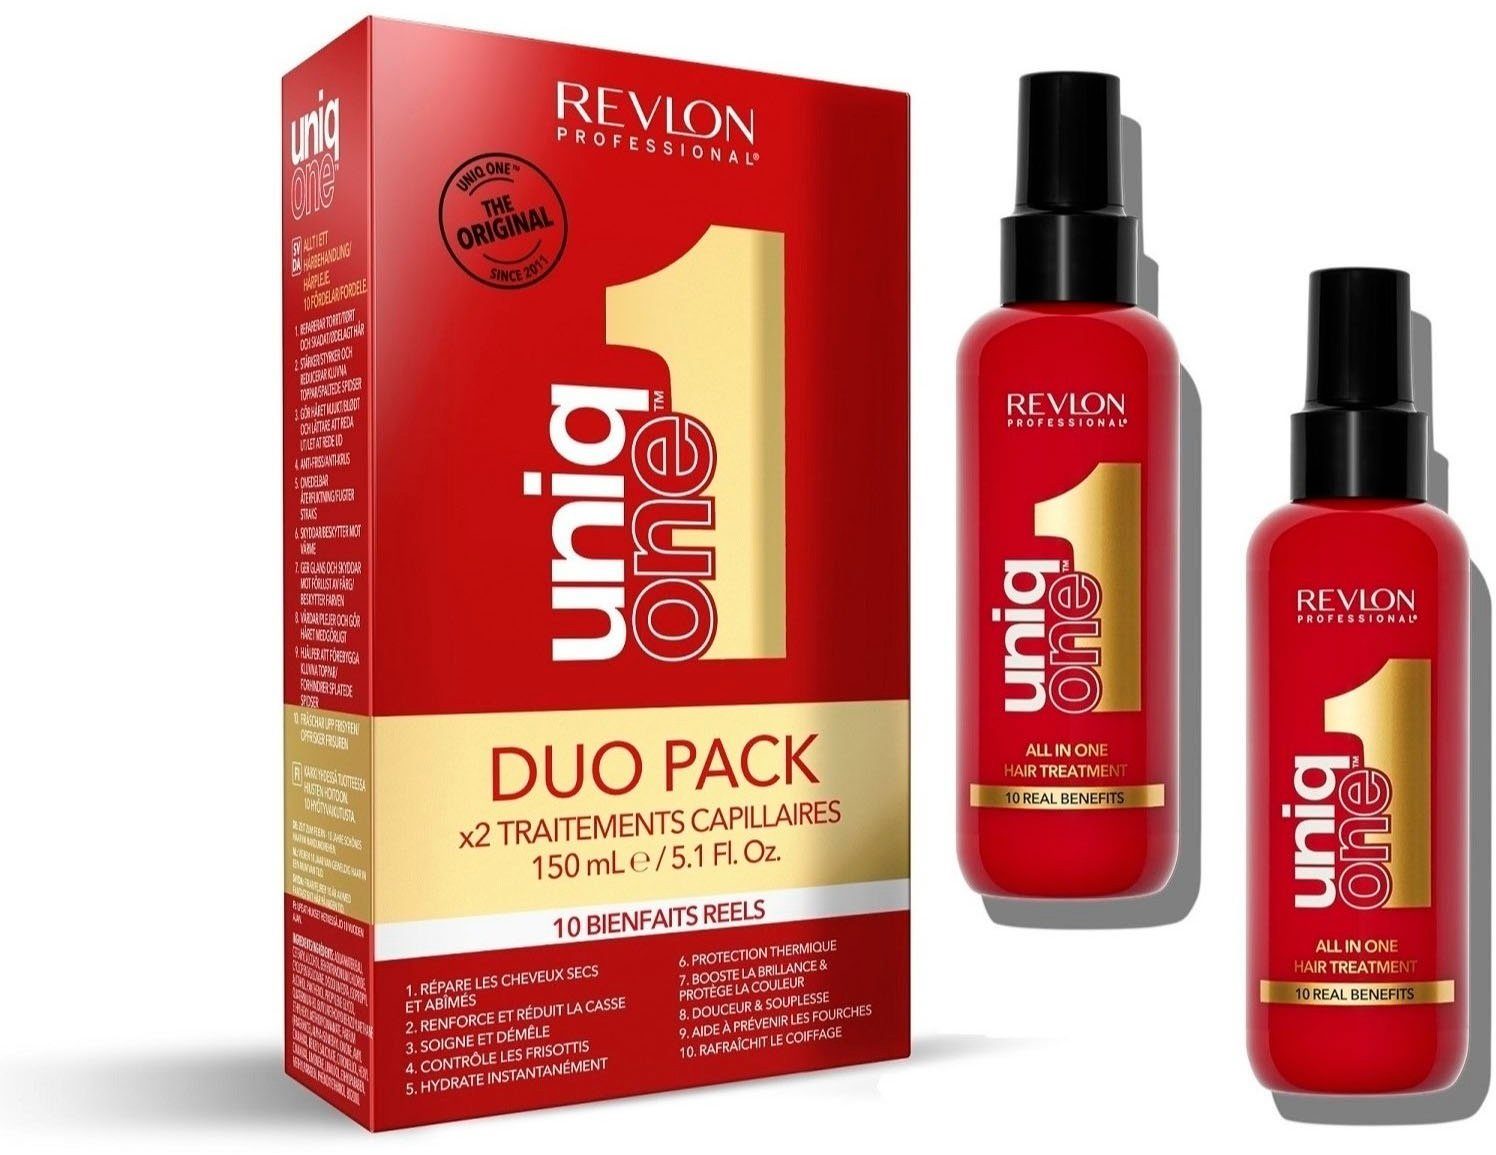 2-tlg., Pflege Uniqone In Haarpflege-Set All PROFESSIONAL Duopack Edition Limited One Treatment Classic Spar-Set, Set, Leave-in Hair REVLON